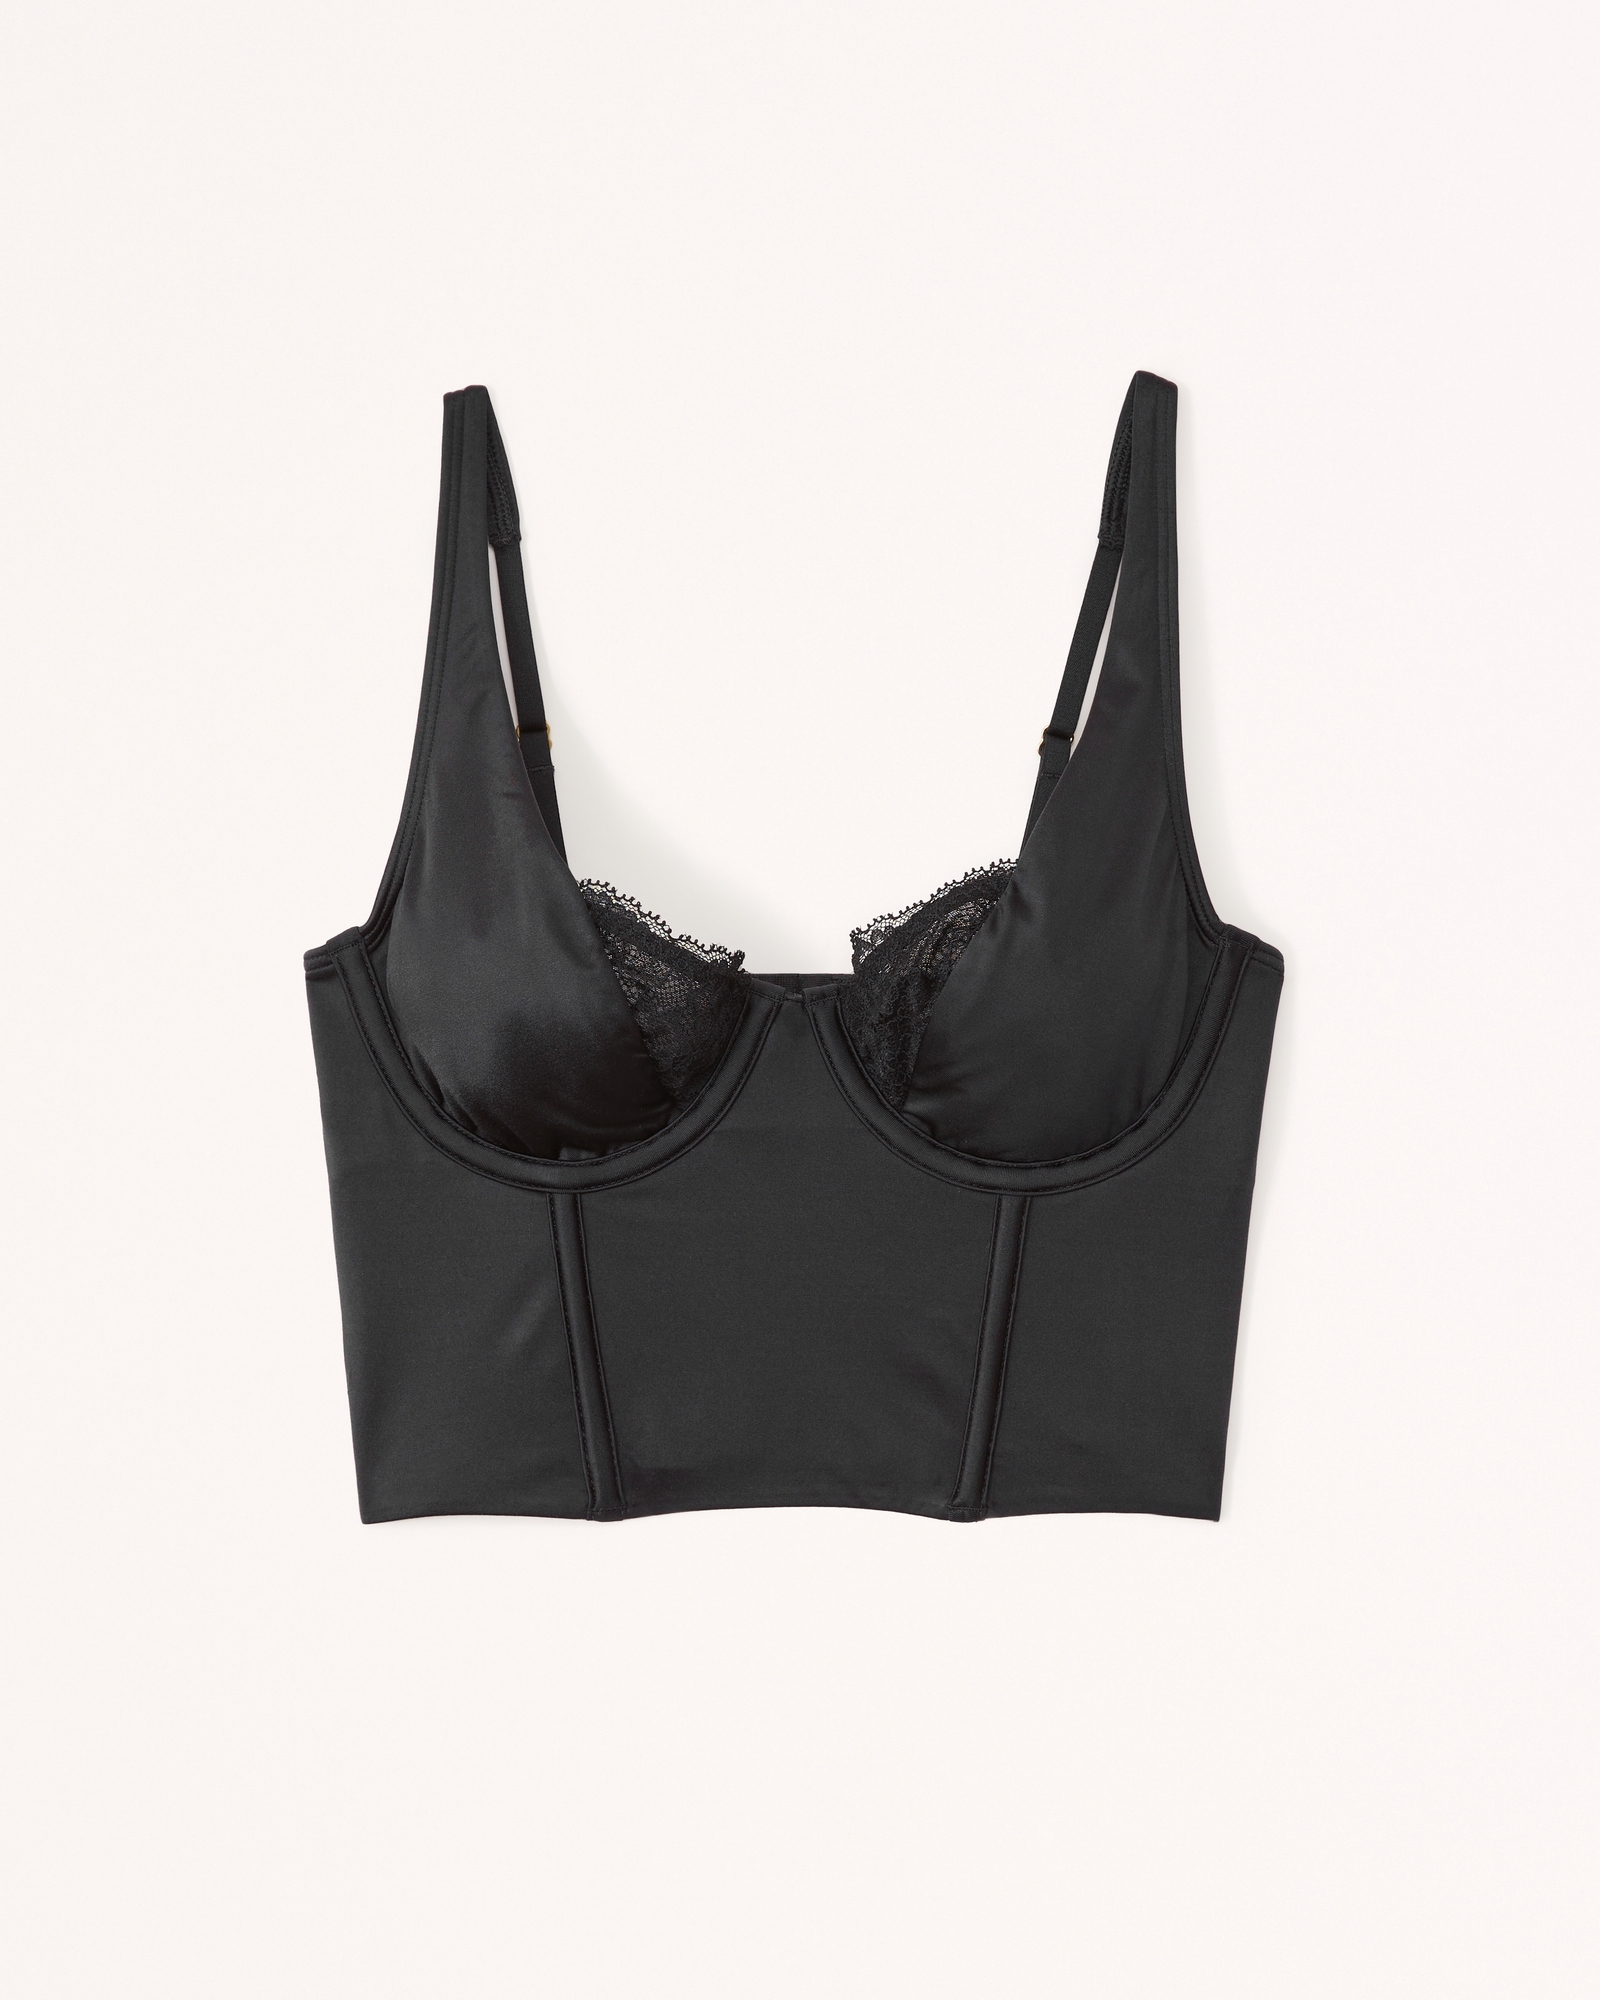 Express Lace Strappy Bustier Crop Top With Bra Cups Black Women's XS